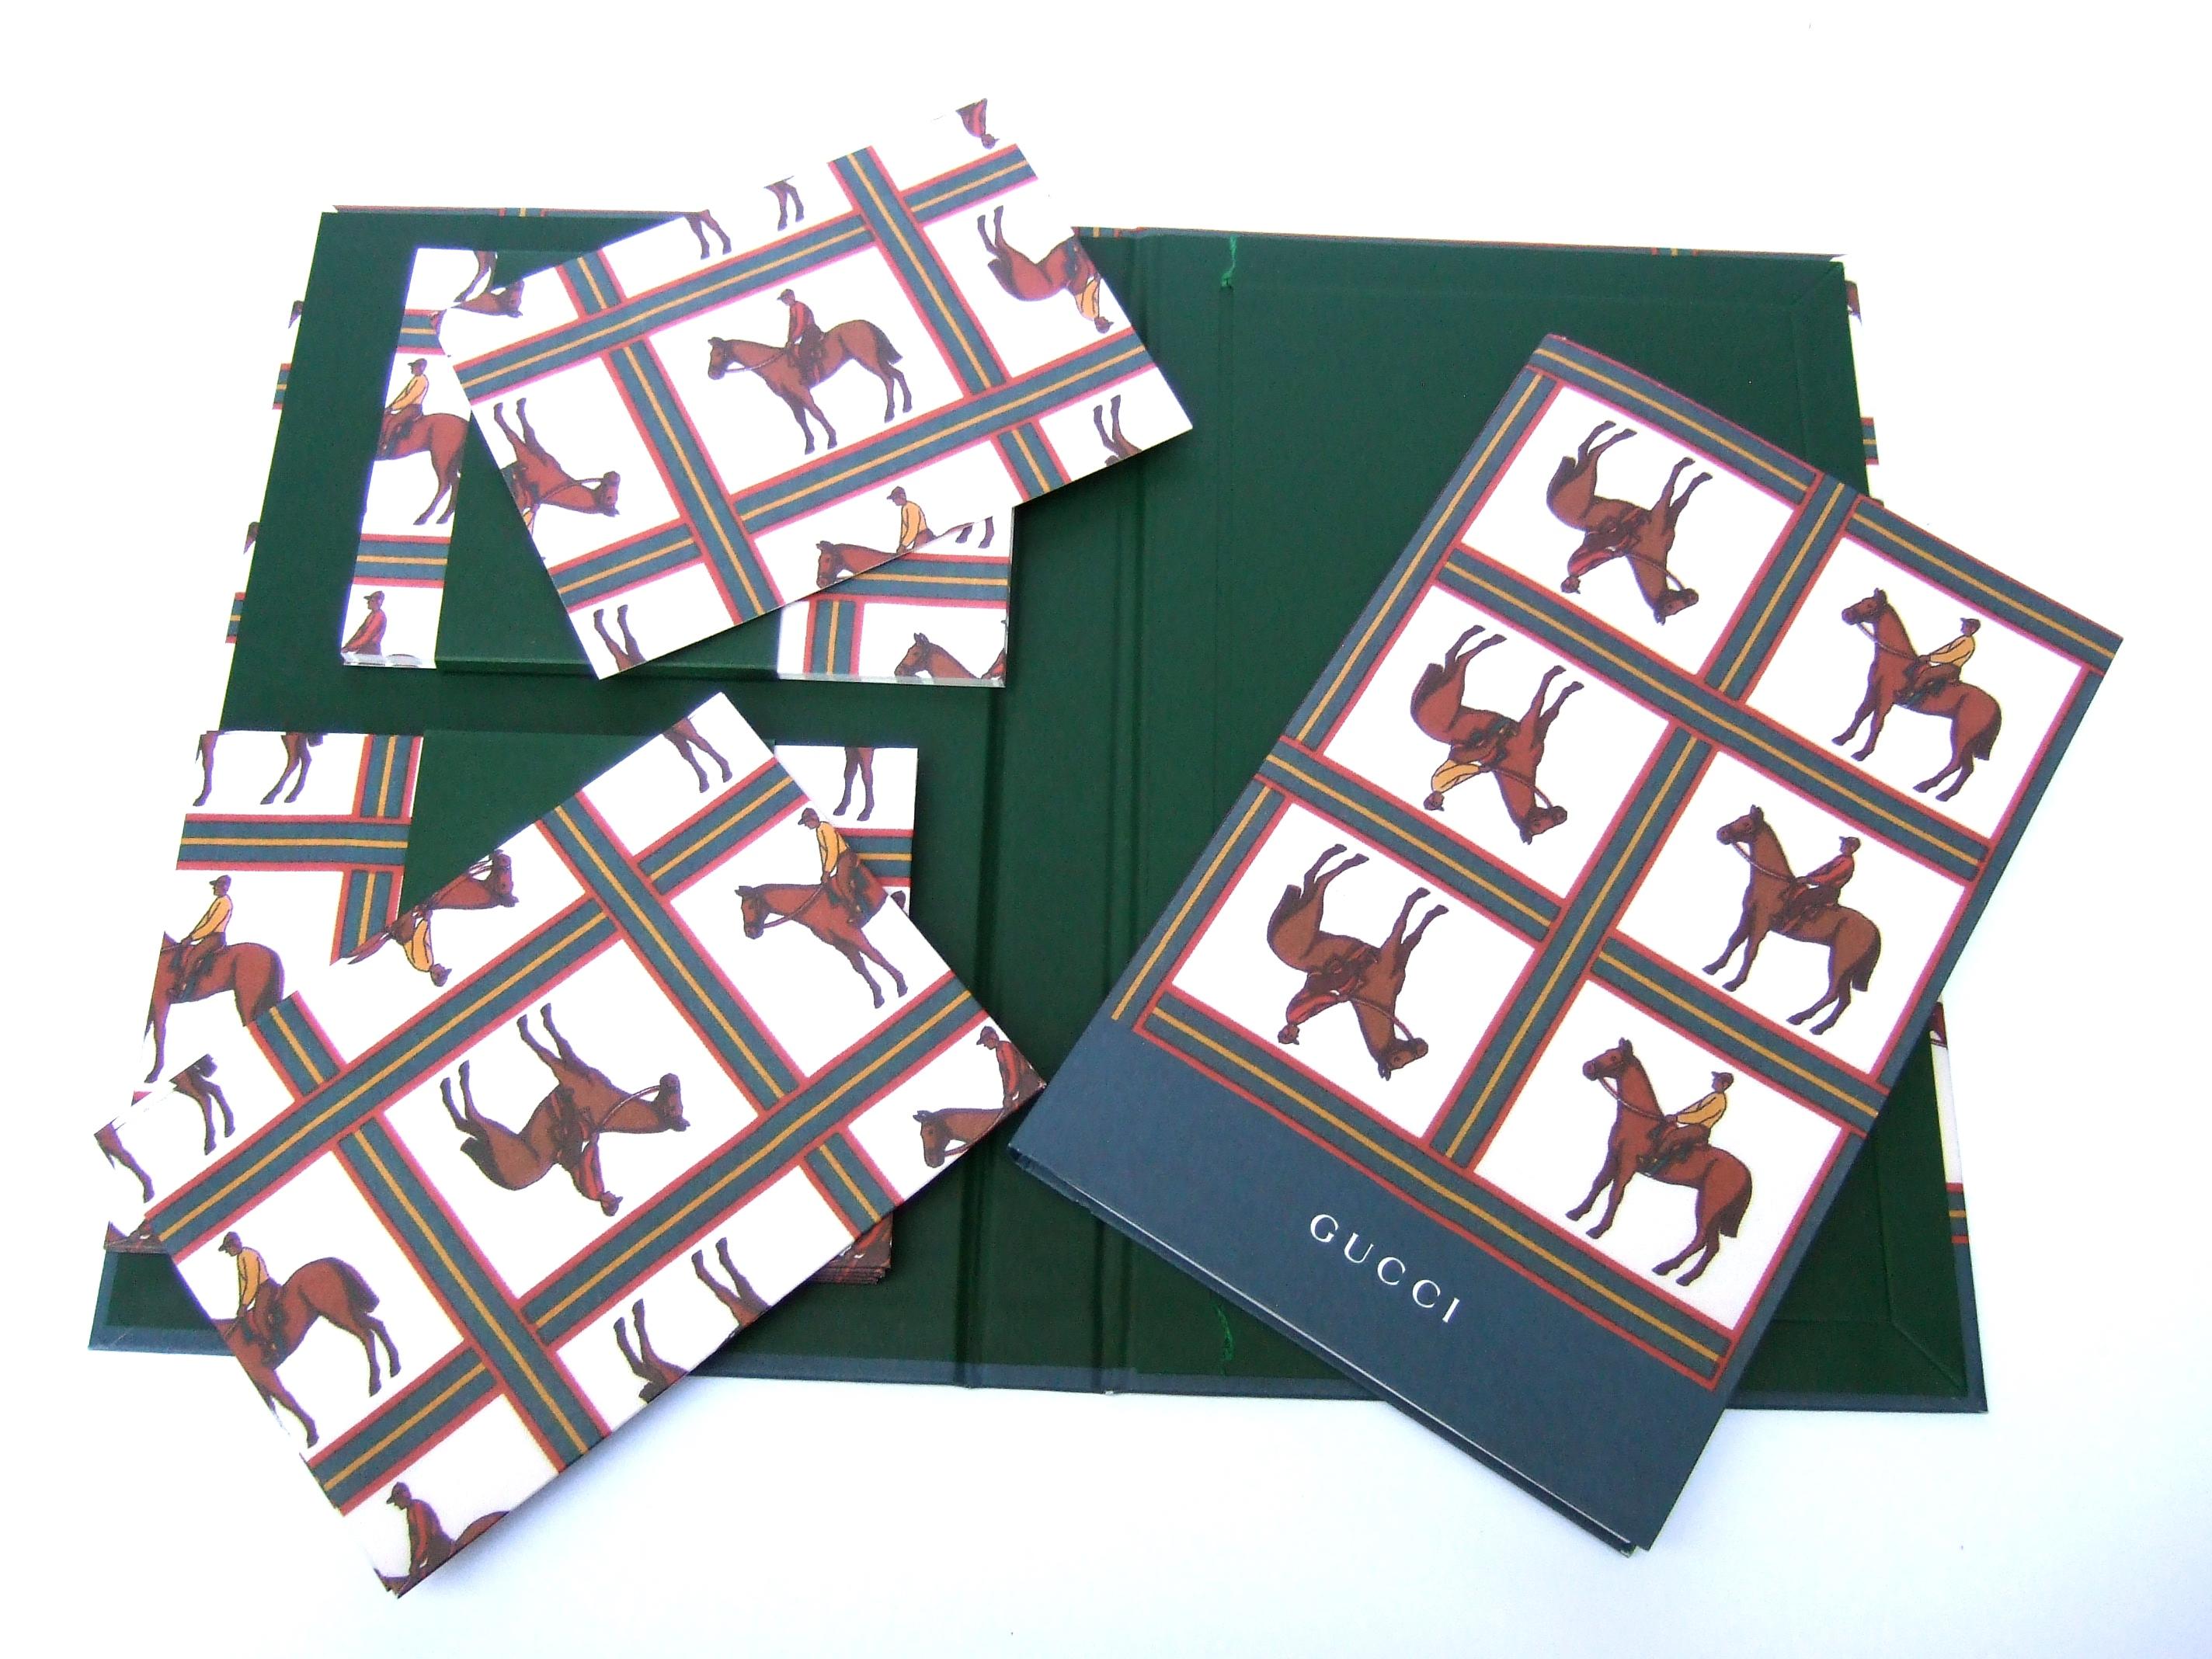 Gucci Equine design note cards & writing journal book stationery set in Gucci box
The stylish set of ten one sided paper note cards are paired with matching envelopes
The stationery set comes with a matching writing journal book with unlined